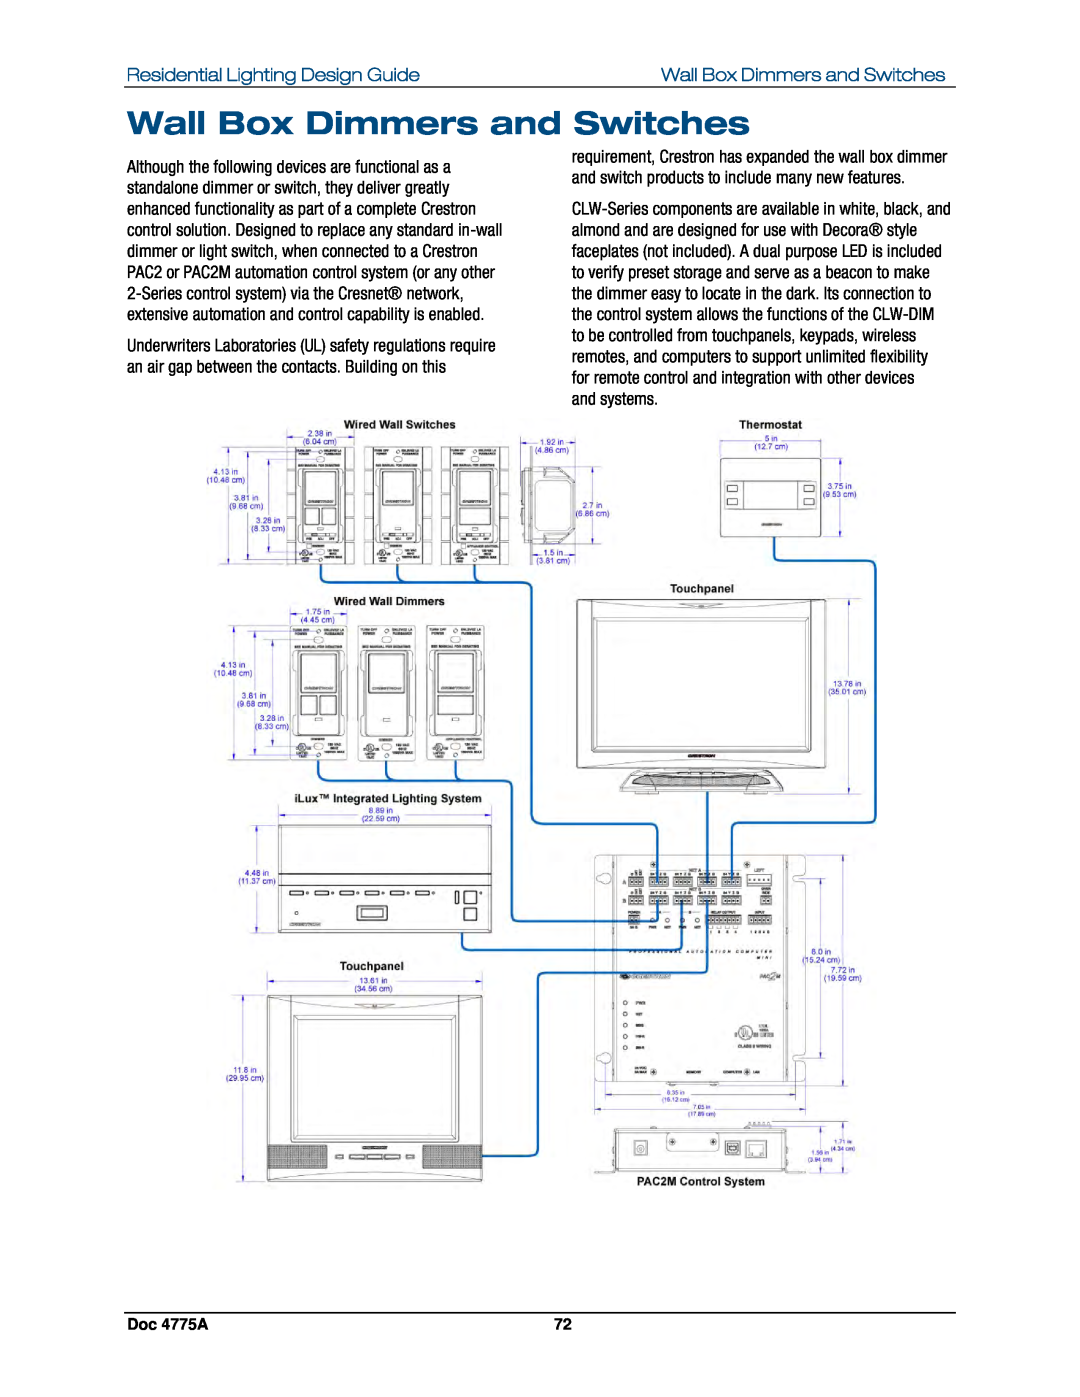 Crestron electronic GLPS-HDSW-FT, IPAC-GL1 Wall Box Dimmers and Switches, Residential Lighting Design Guide, Doc 4775A 